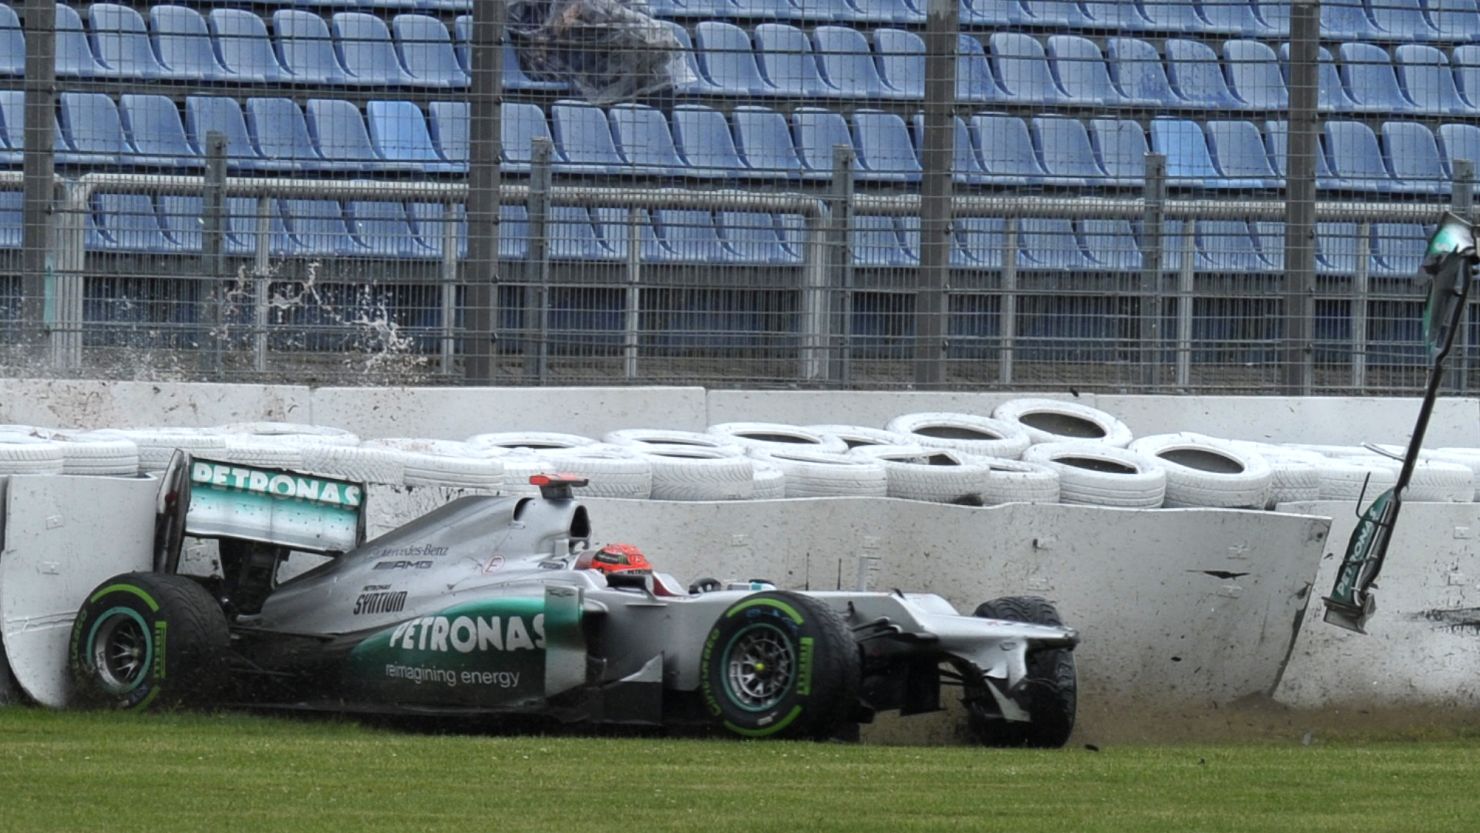 Michael Schumacher crashes in the final minutes of Friday's second practice session at the German grand prix